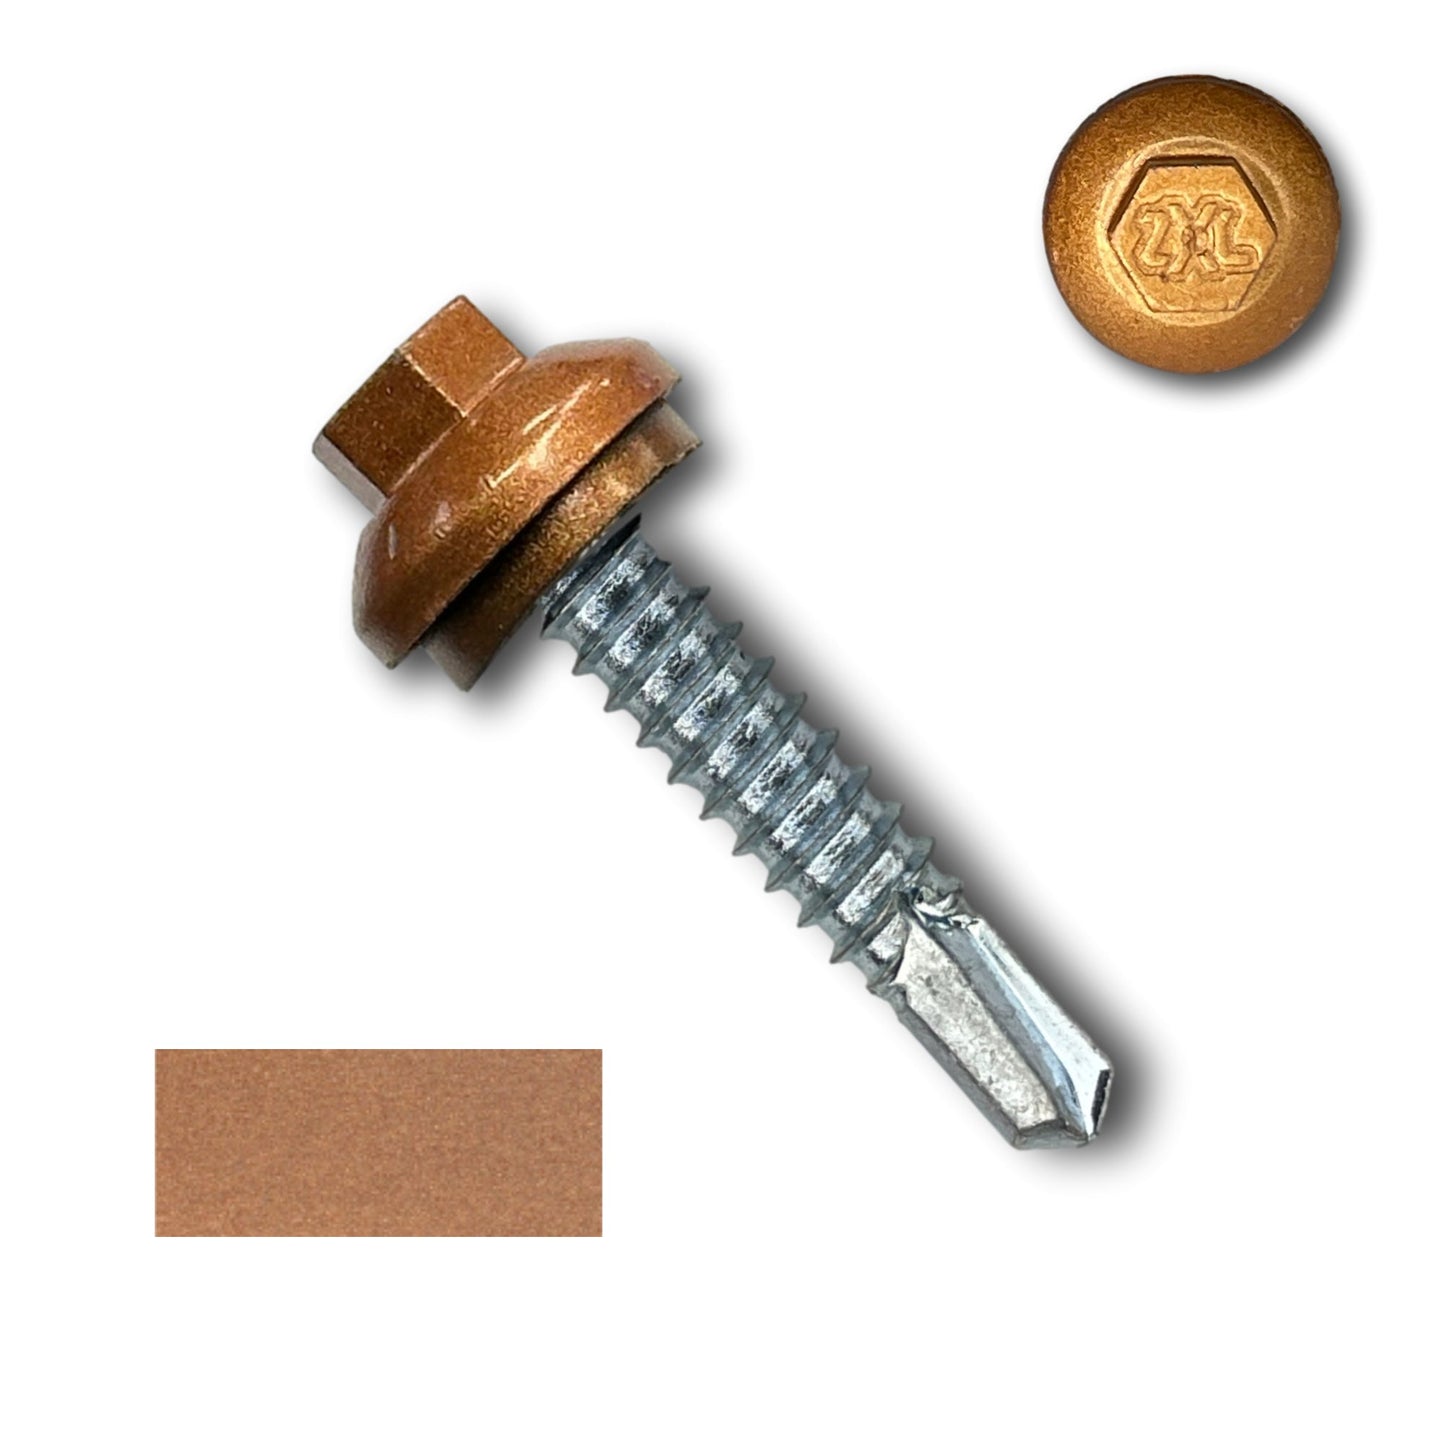 A metallic screw with a hexagonal head and washer, shown with a close-up of the head, and a color swatch matching the head's copper color. The close-up of the head features a logo with "2K" inscribed, similar to other Perma Cover #14 x 1.25" ZXL Dome Cap Metal Building Screws (Metal-to-Metal), Self-Drilling - 250, 500, or 1000 Pack used in metal building projects.